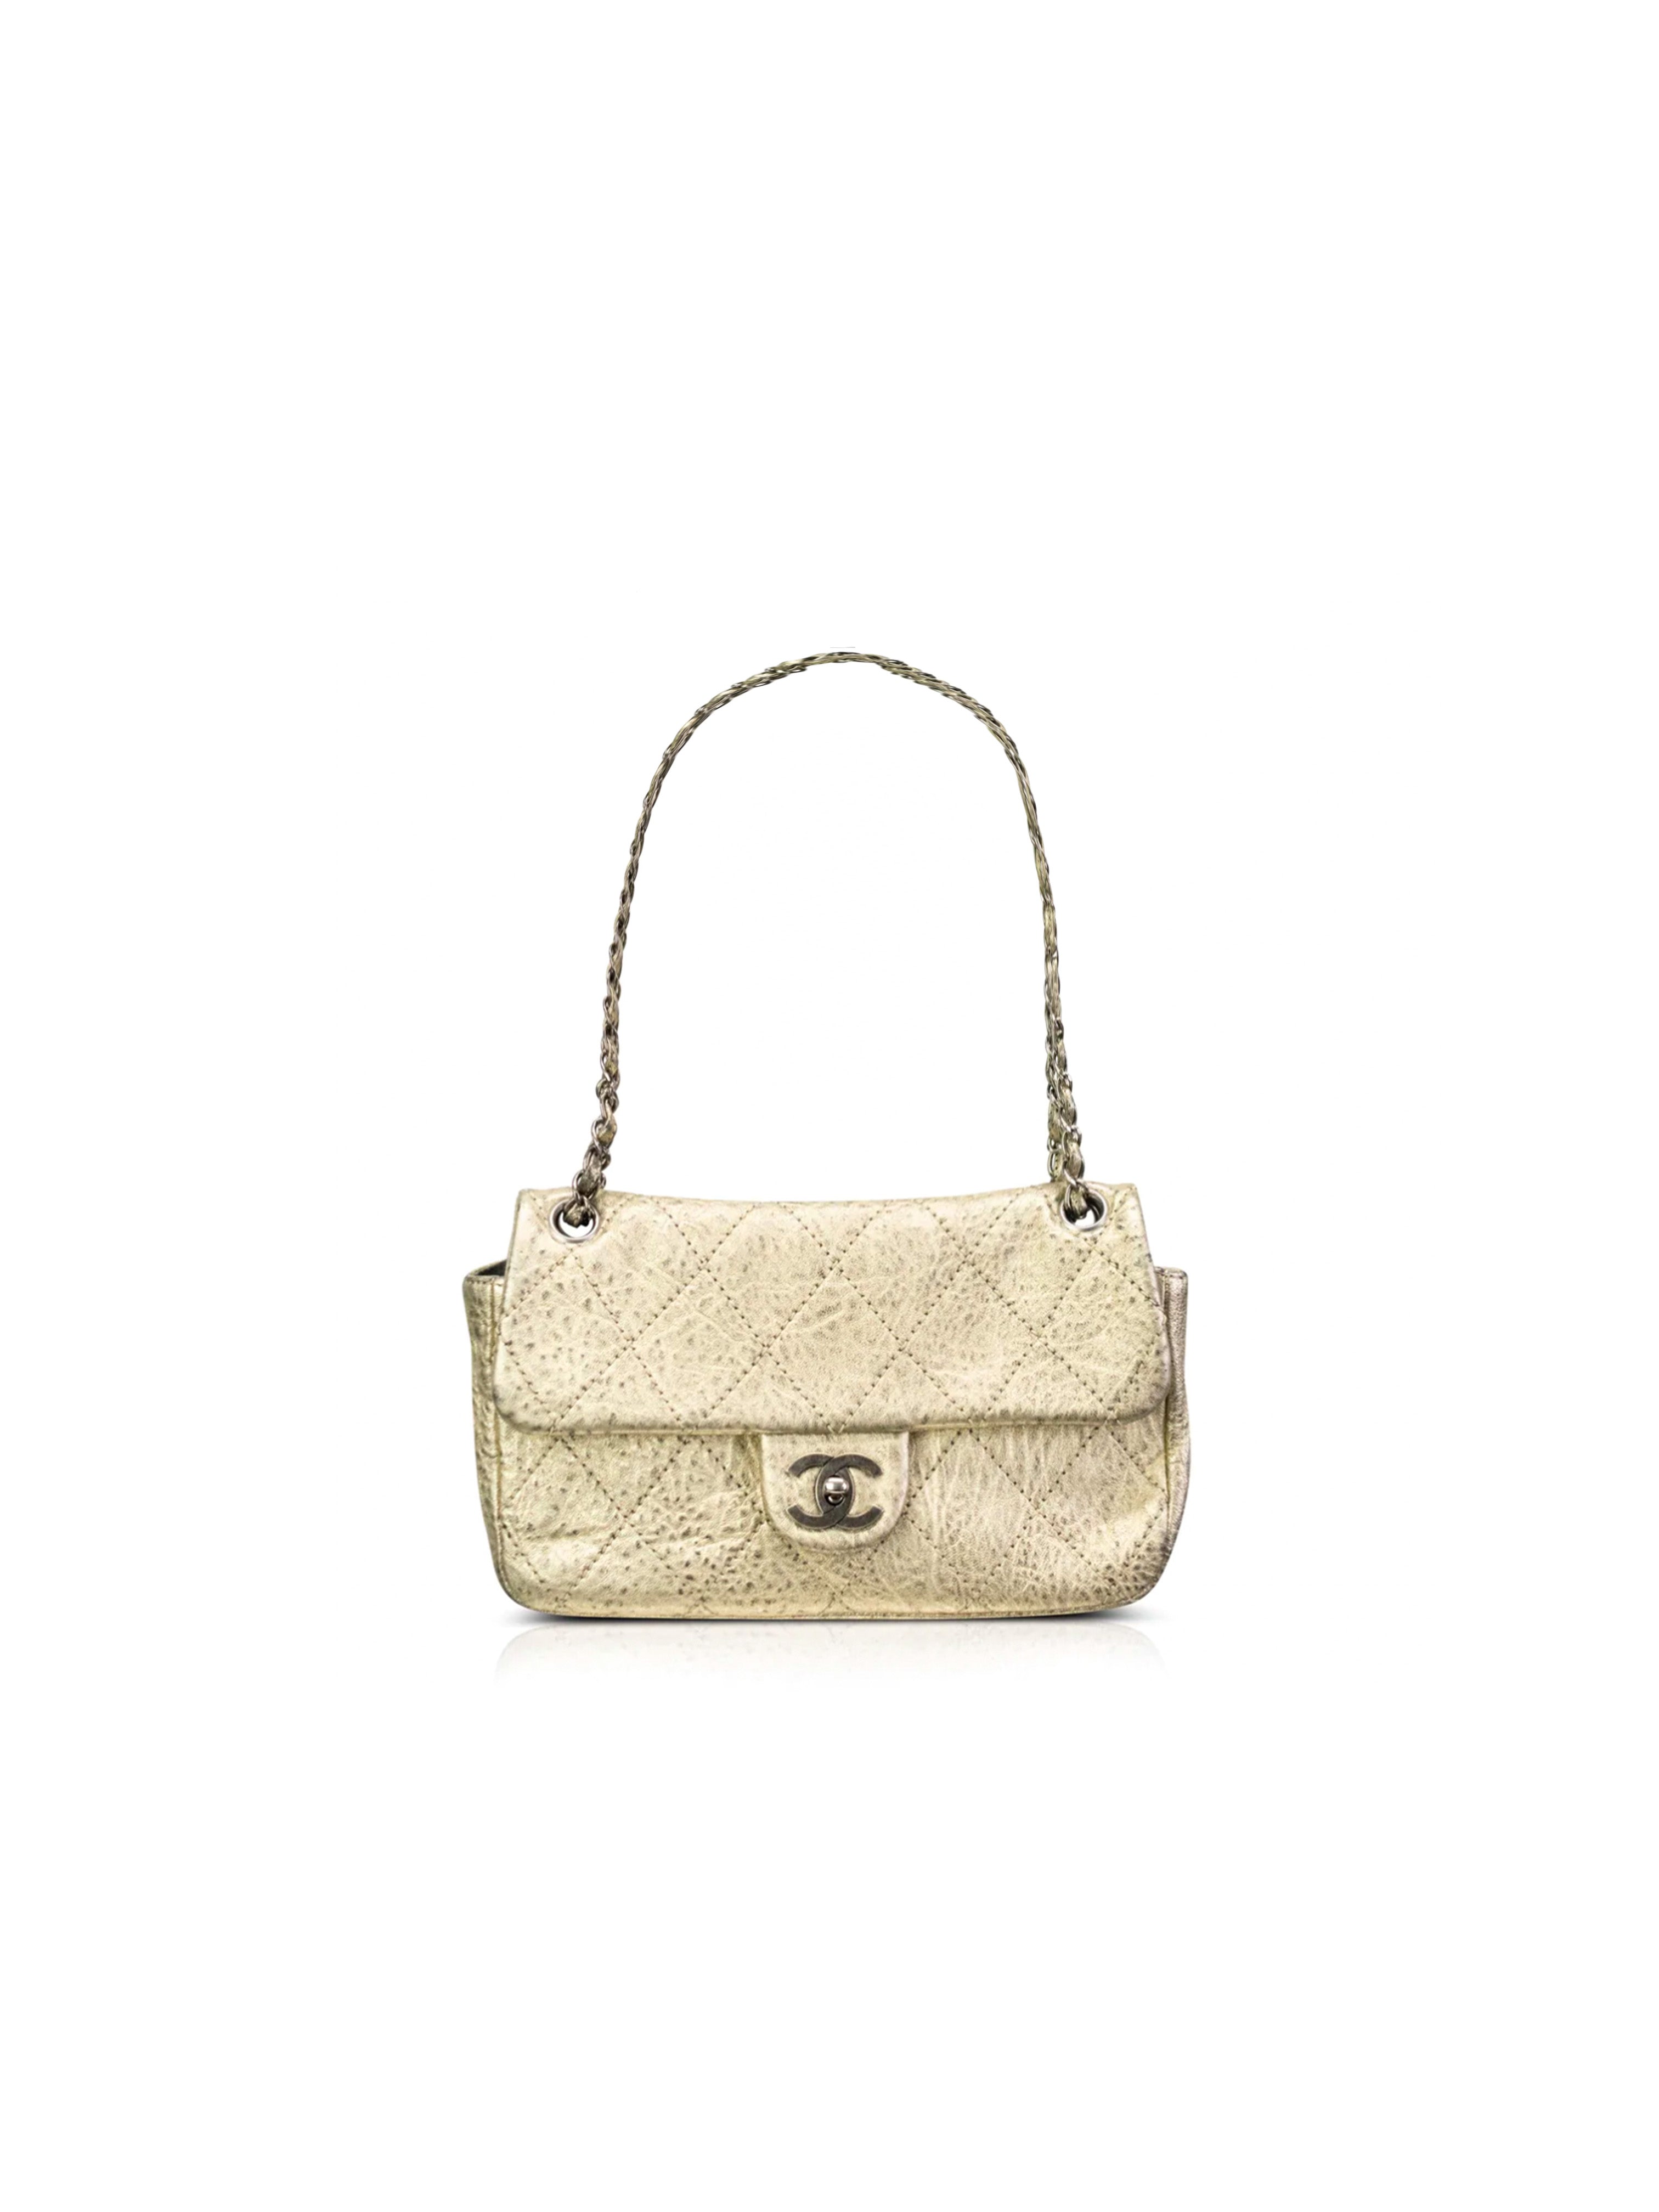 Chanel Quilted Iridescent Calfskin Chic Flap Bag